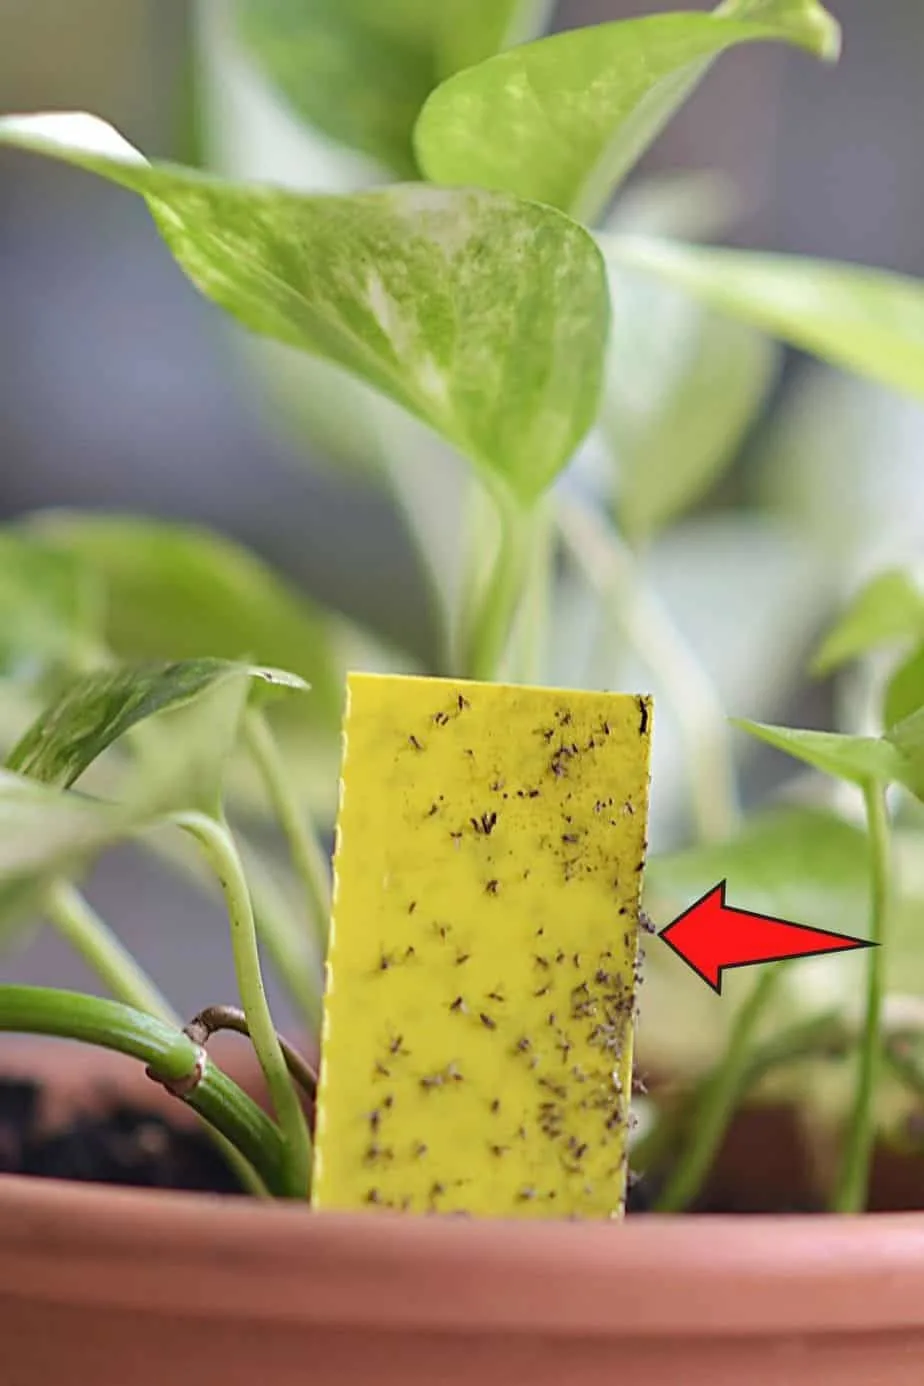 One way to keep the thrips population under control is to place blue or yellow sticky traps near your plants